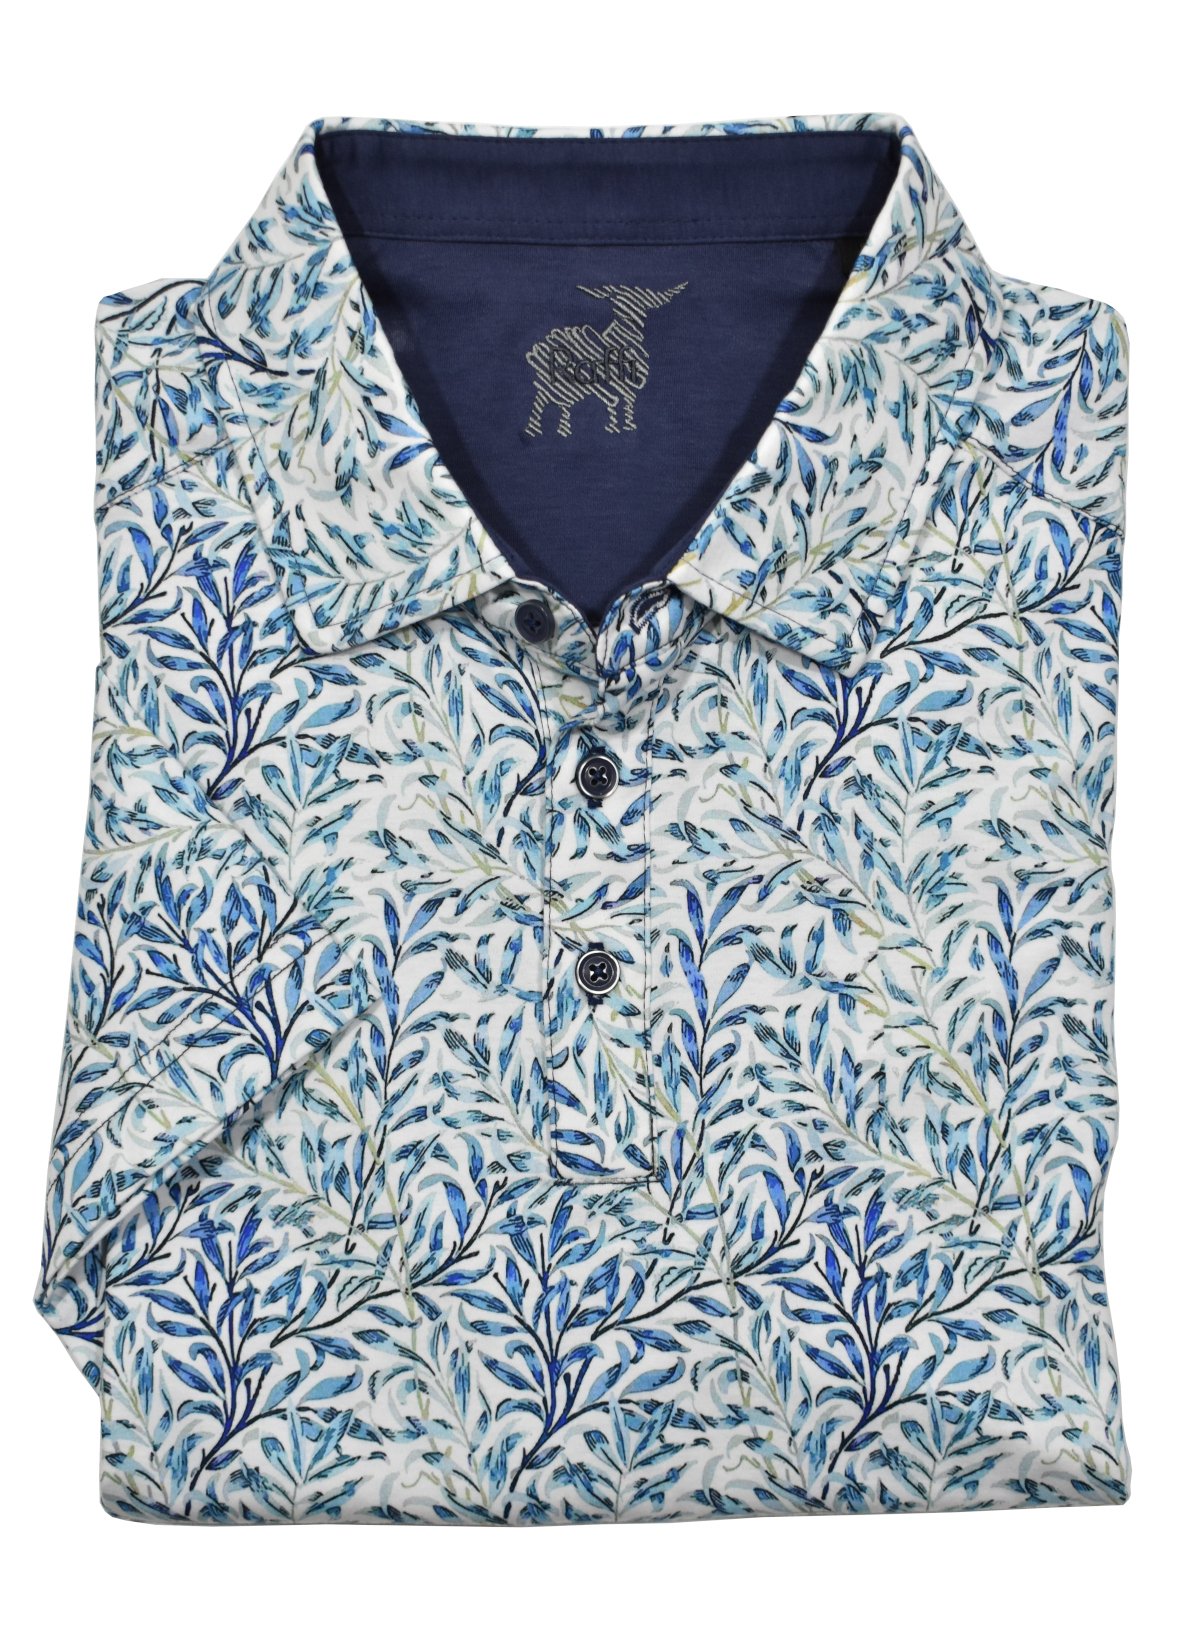 Experience ultimate comfort and style with the ZR24146 Raffi Indigo Floral Polo. Made with the sought after aqua cotton fabric, this polo is superb to the touch. The abstract print pattern in trend blue colors and self collar model add a modern and trendy touch. Upgrade your wardrobe with this must-have piece.